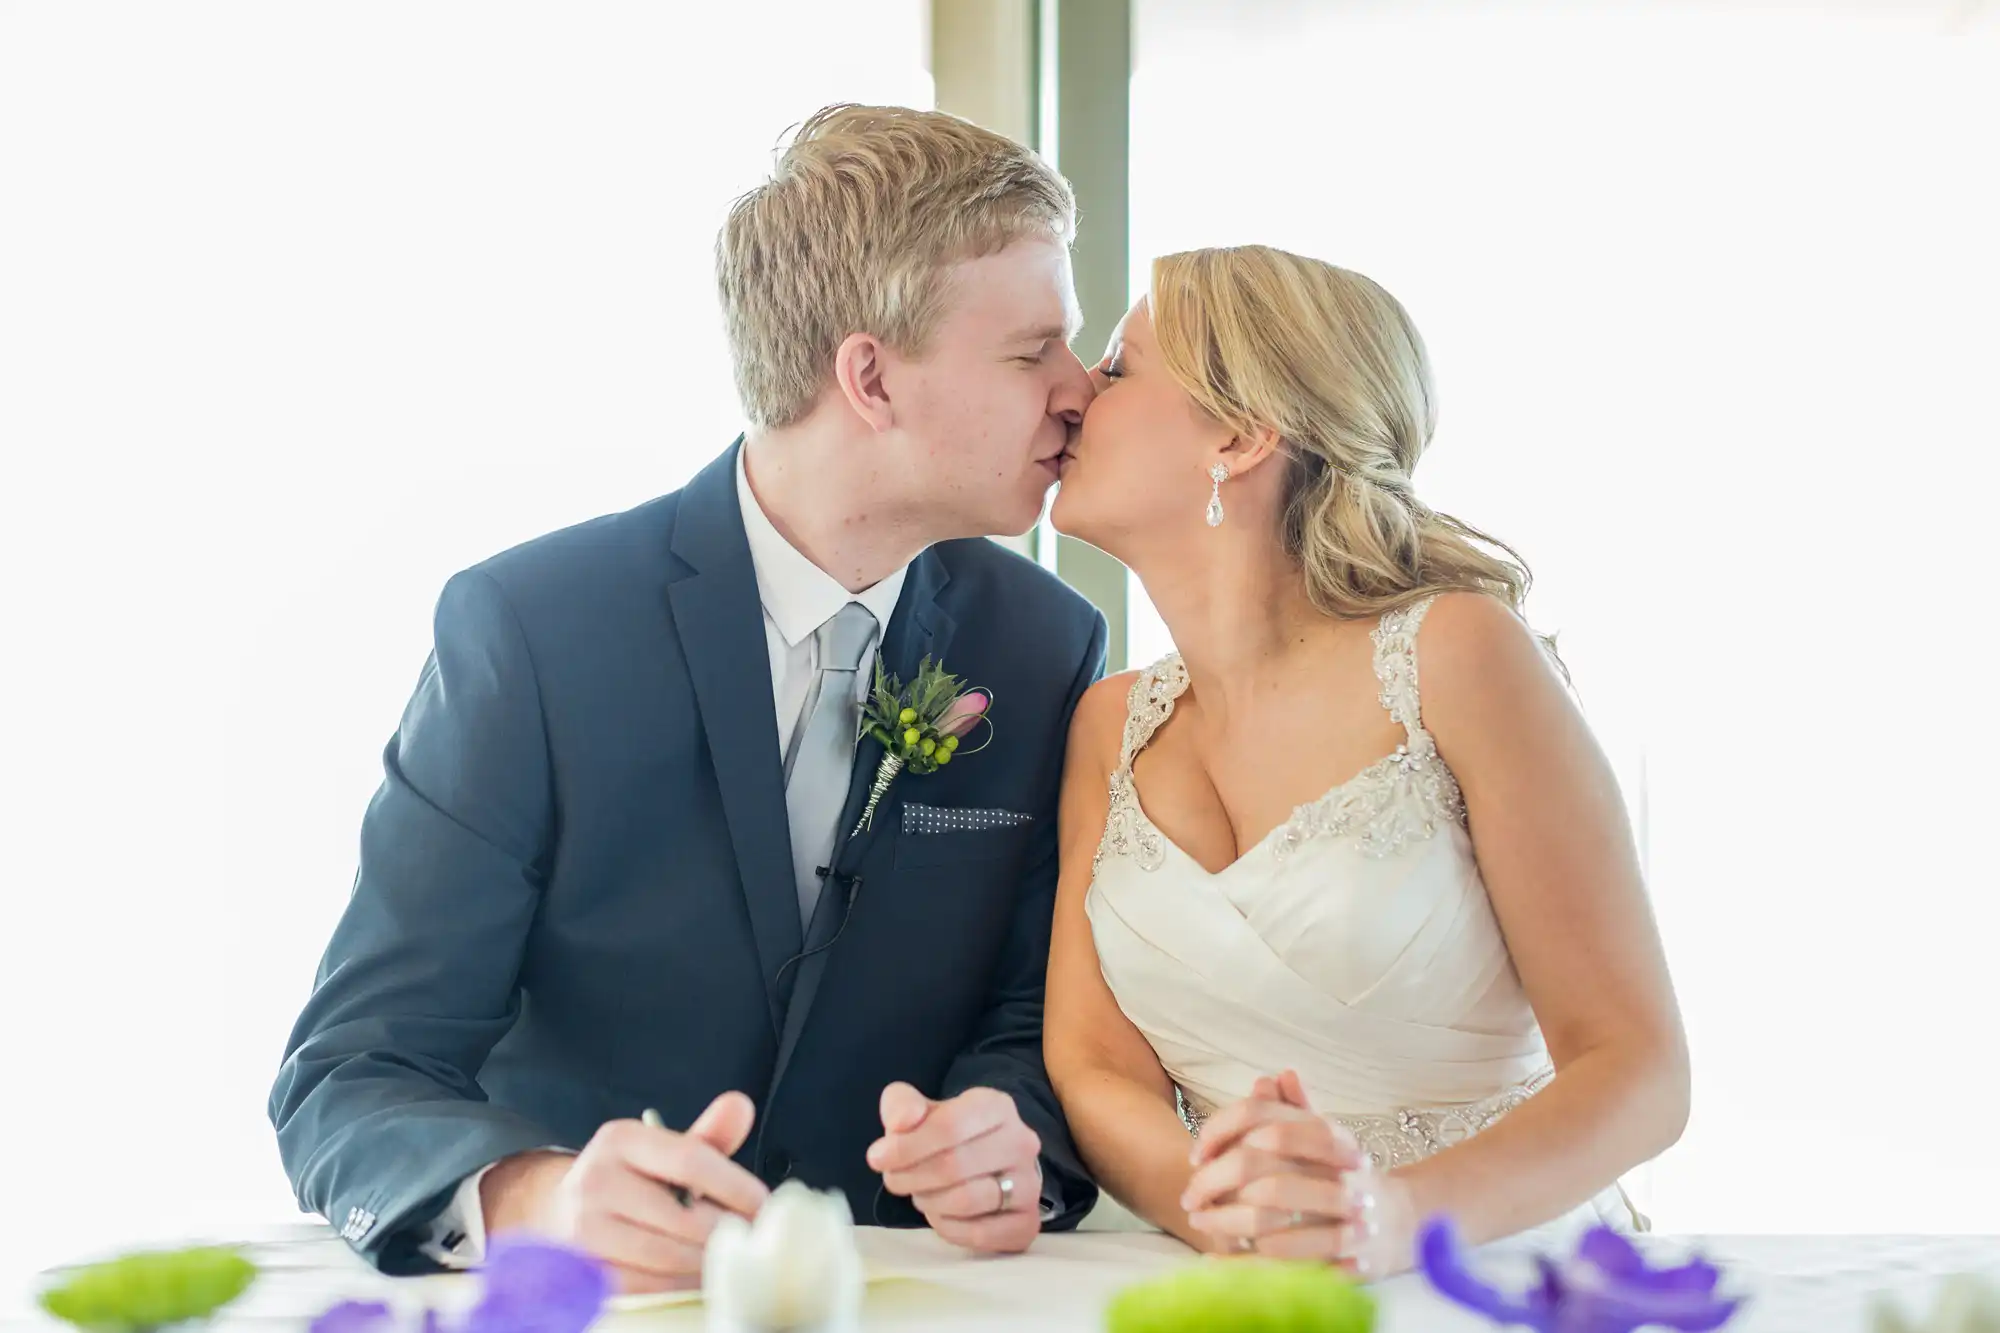 A bride and groom kissing at their wedding reception table, dressed in formal attire, with a bright window backlighting them.